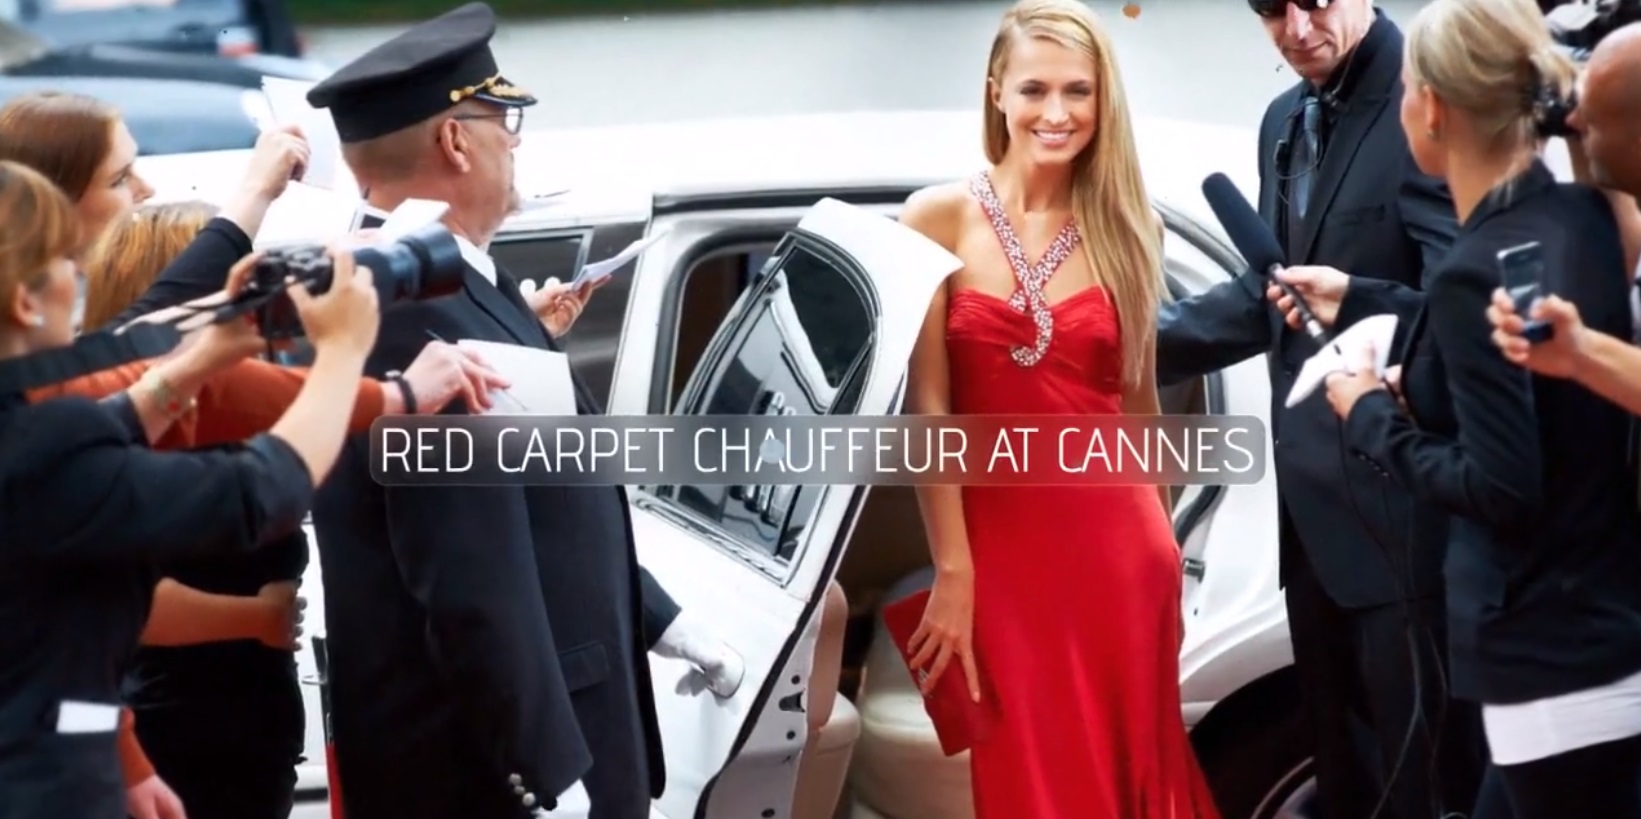 book a chauffeur to drive you onto the red carpet at cannes film festival